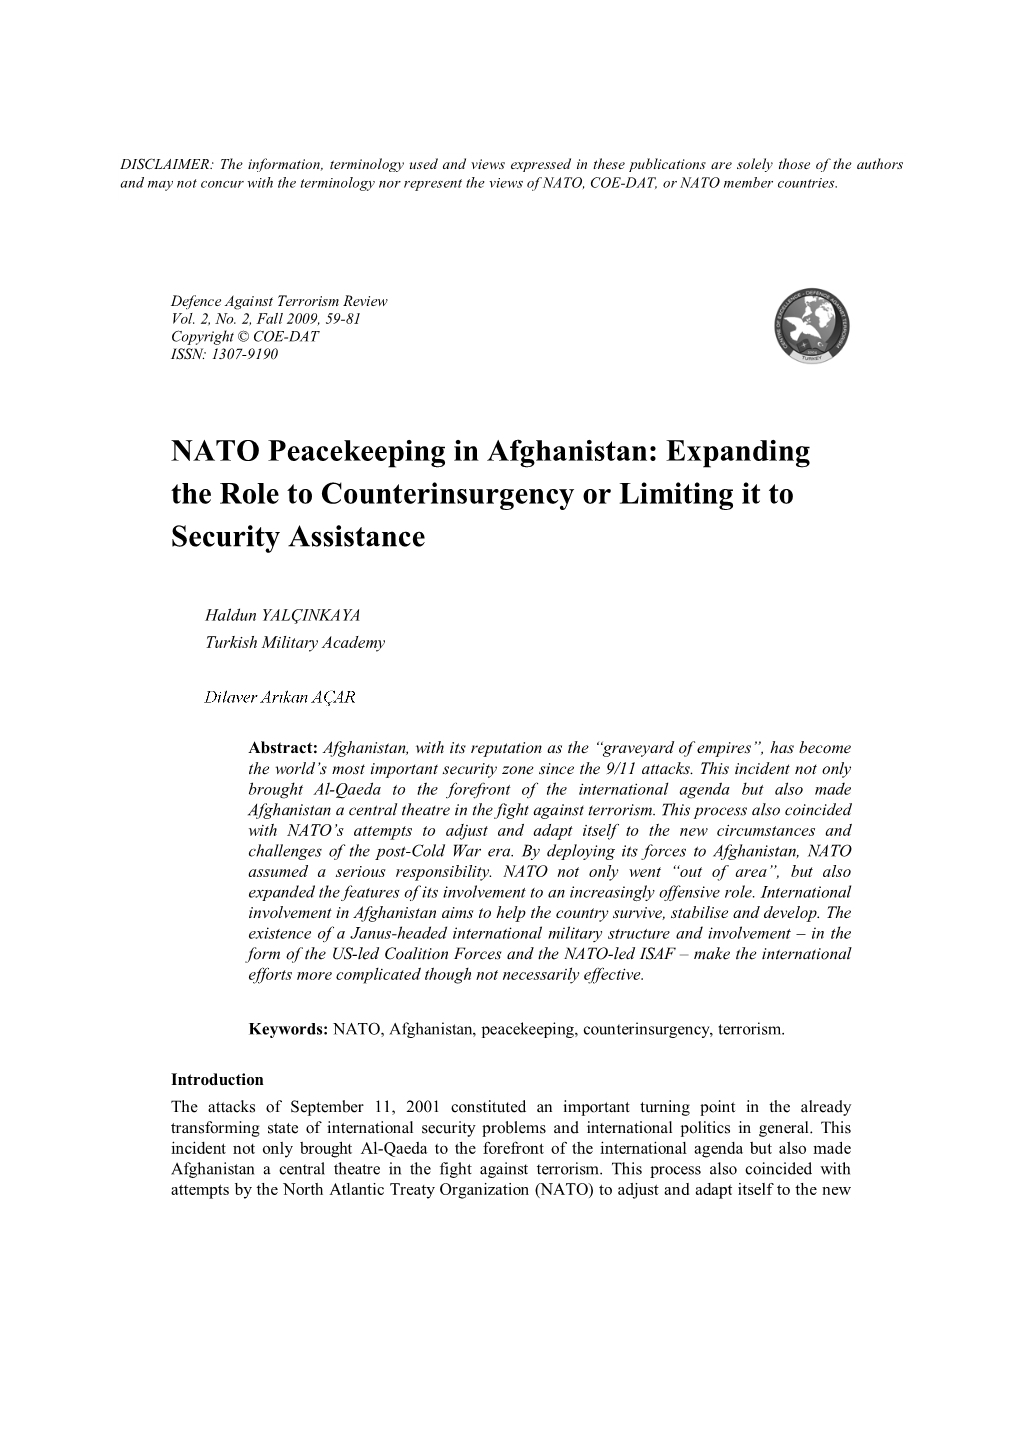 NATO Peacekeeping in Afghanistan: Expanding the Role to Counterinsurgency Or Limiting It to Security Assistance